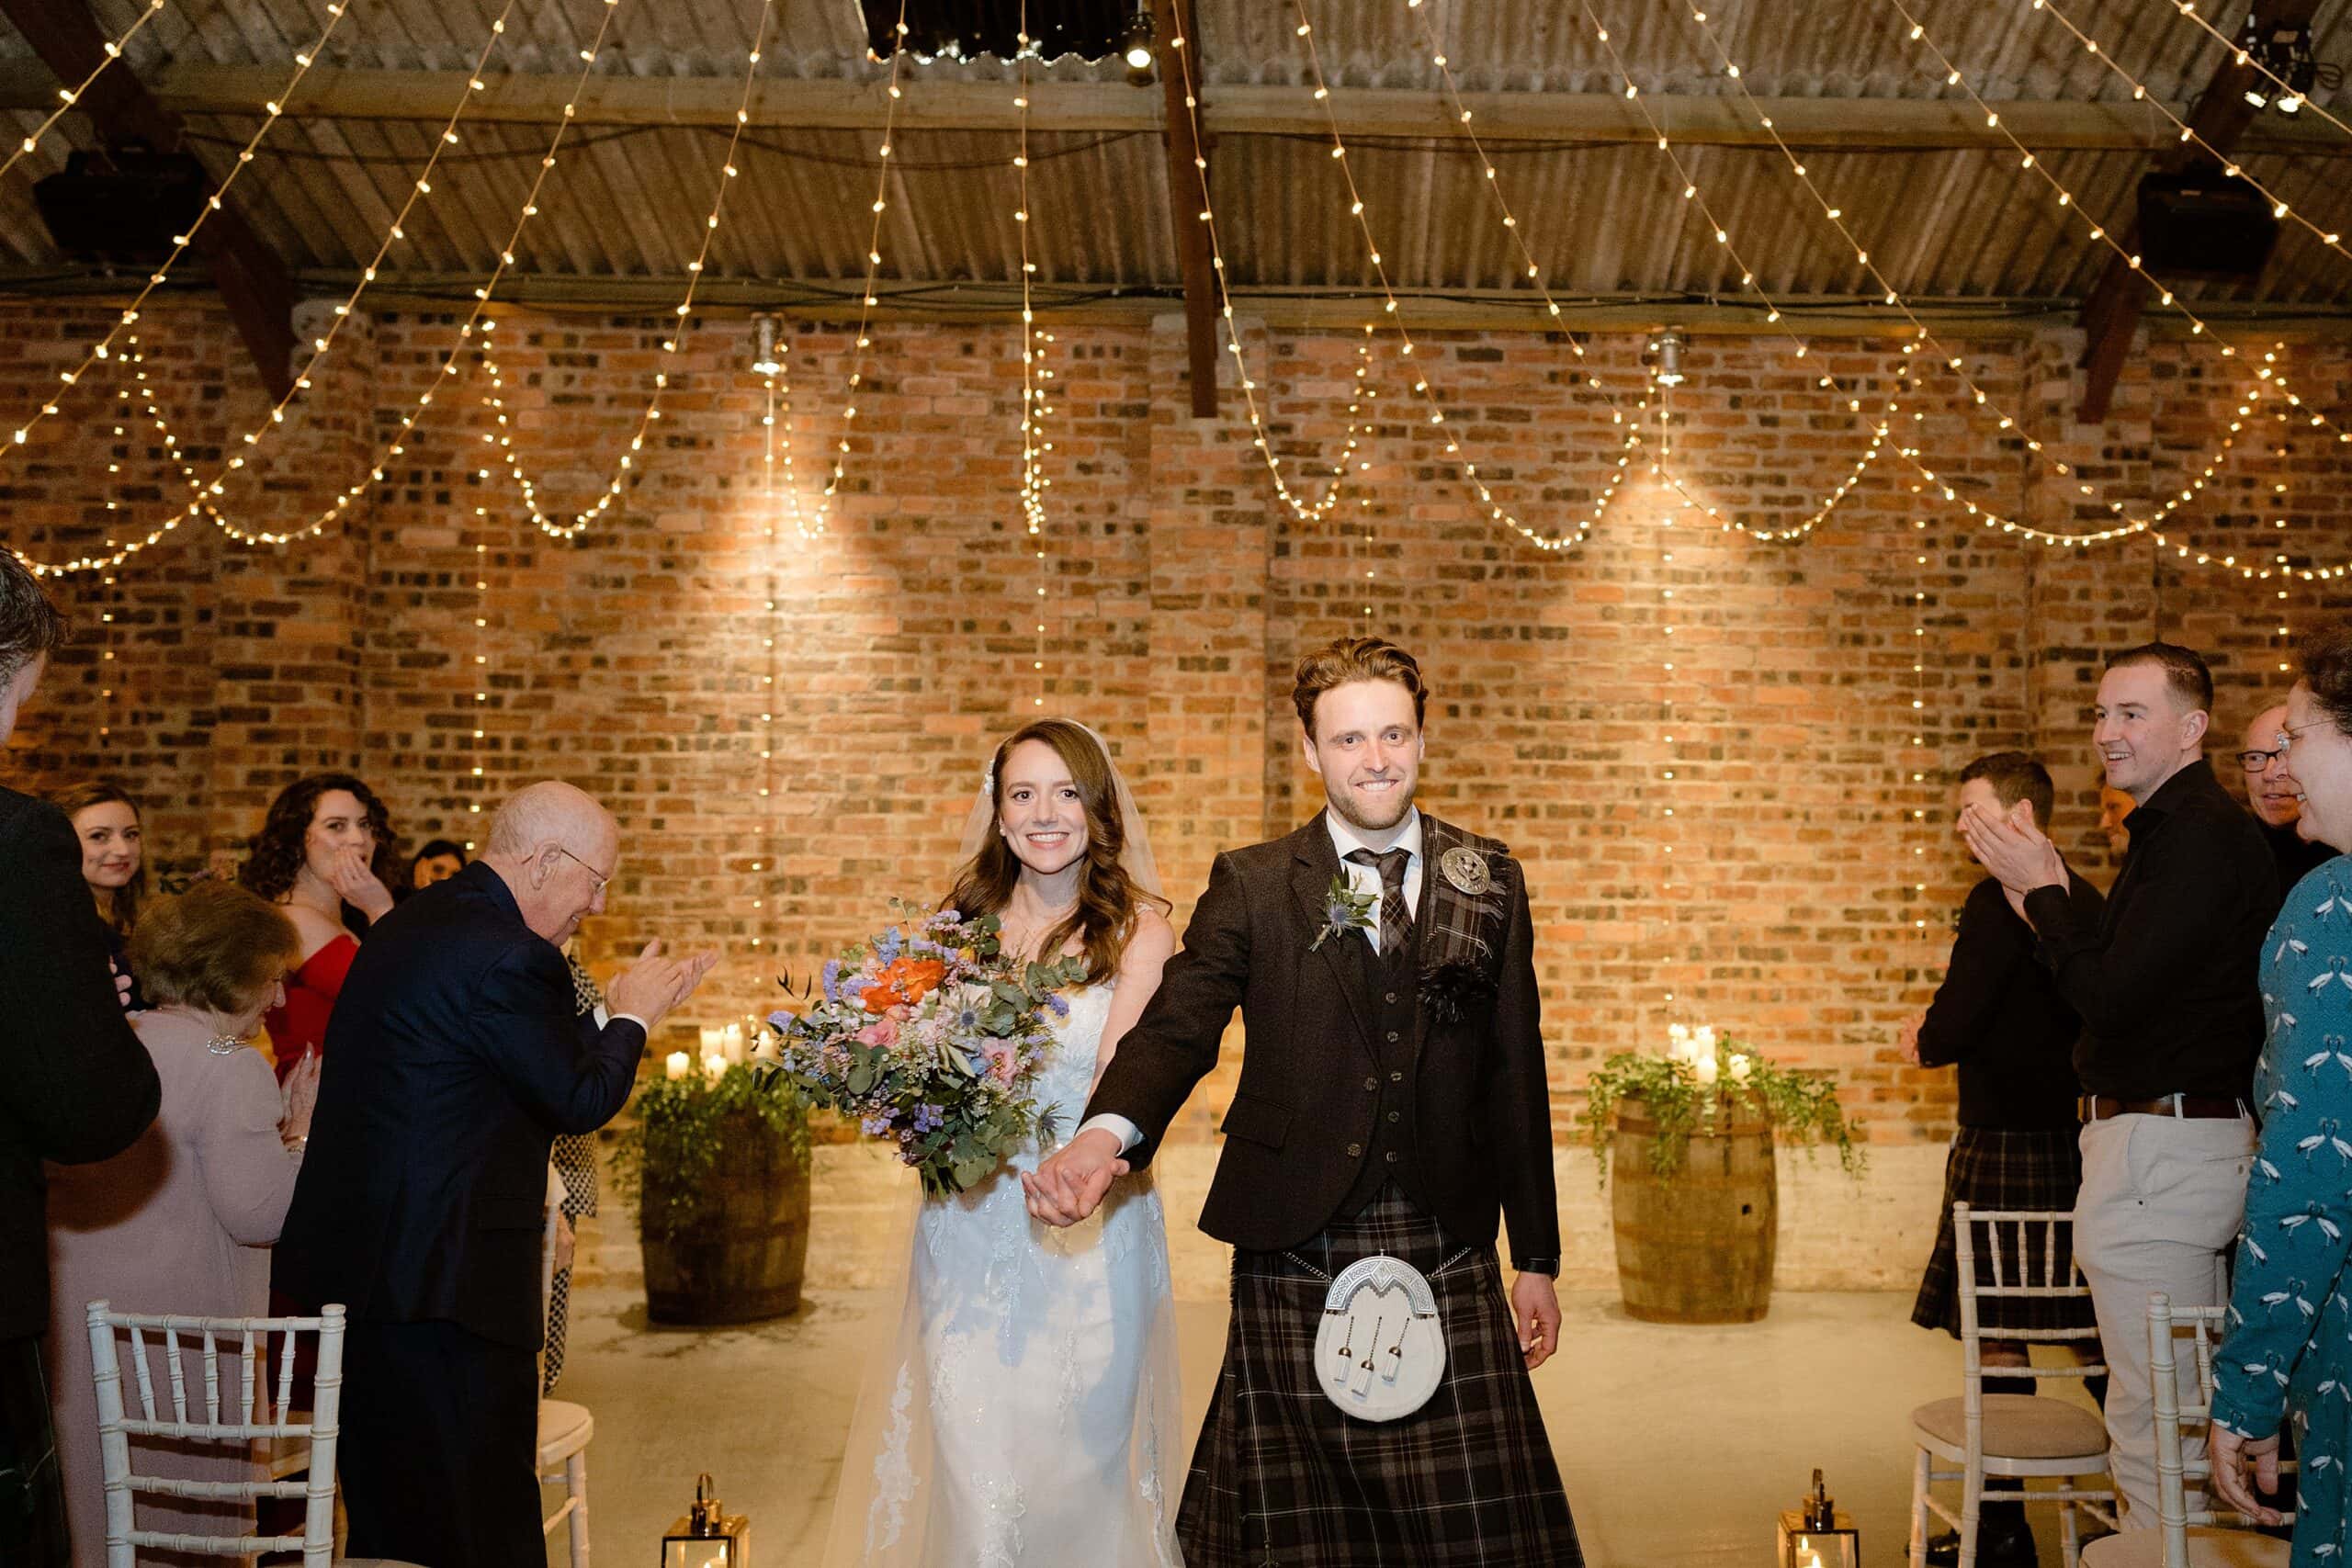 guests applaud as the bride and groom hold hands and smile as they exit down the aisle beneath festoon lights following their barn wedding ceremony captured by st andrews wedding photographer in scotland